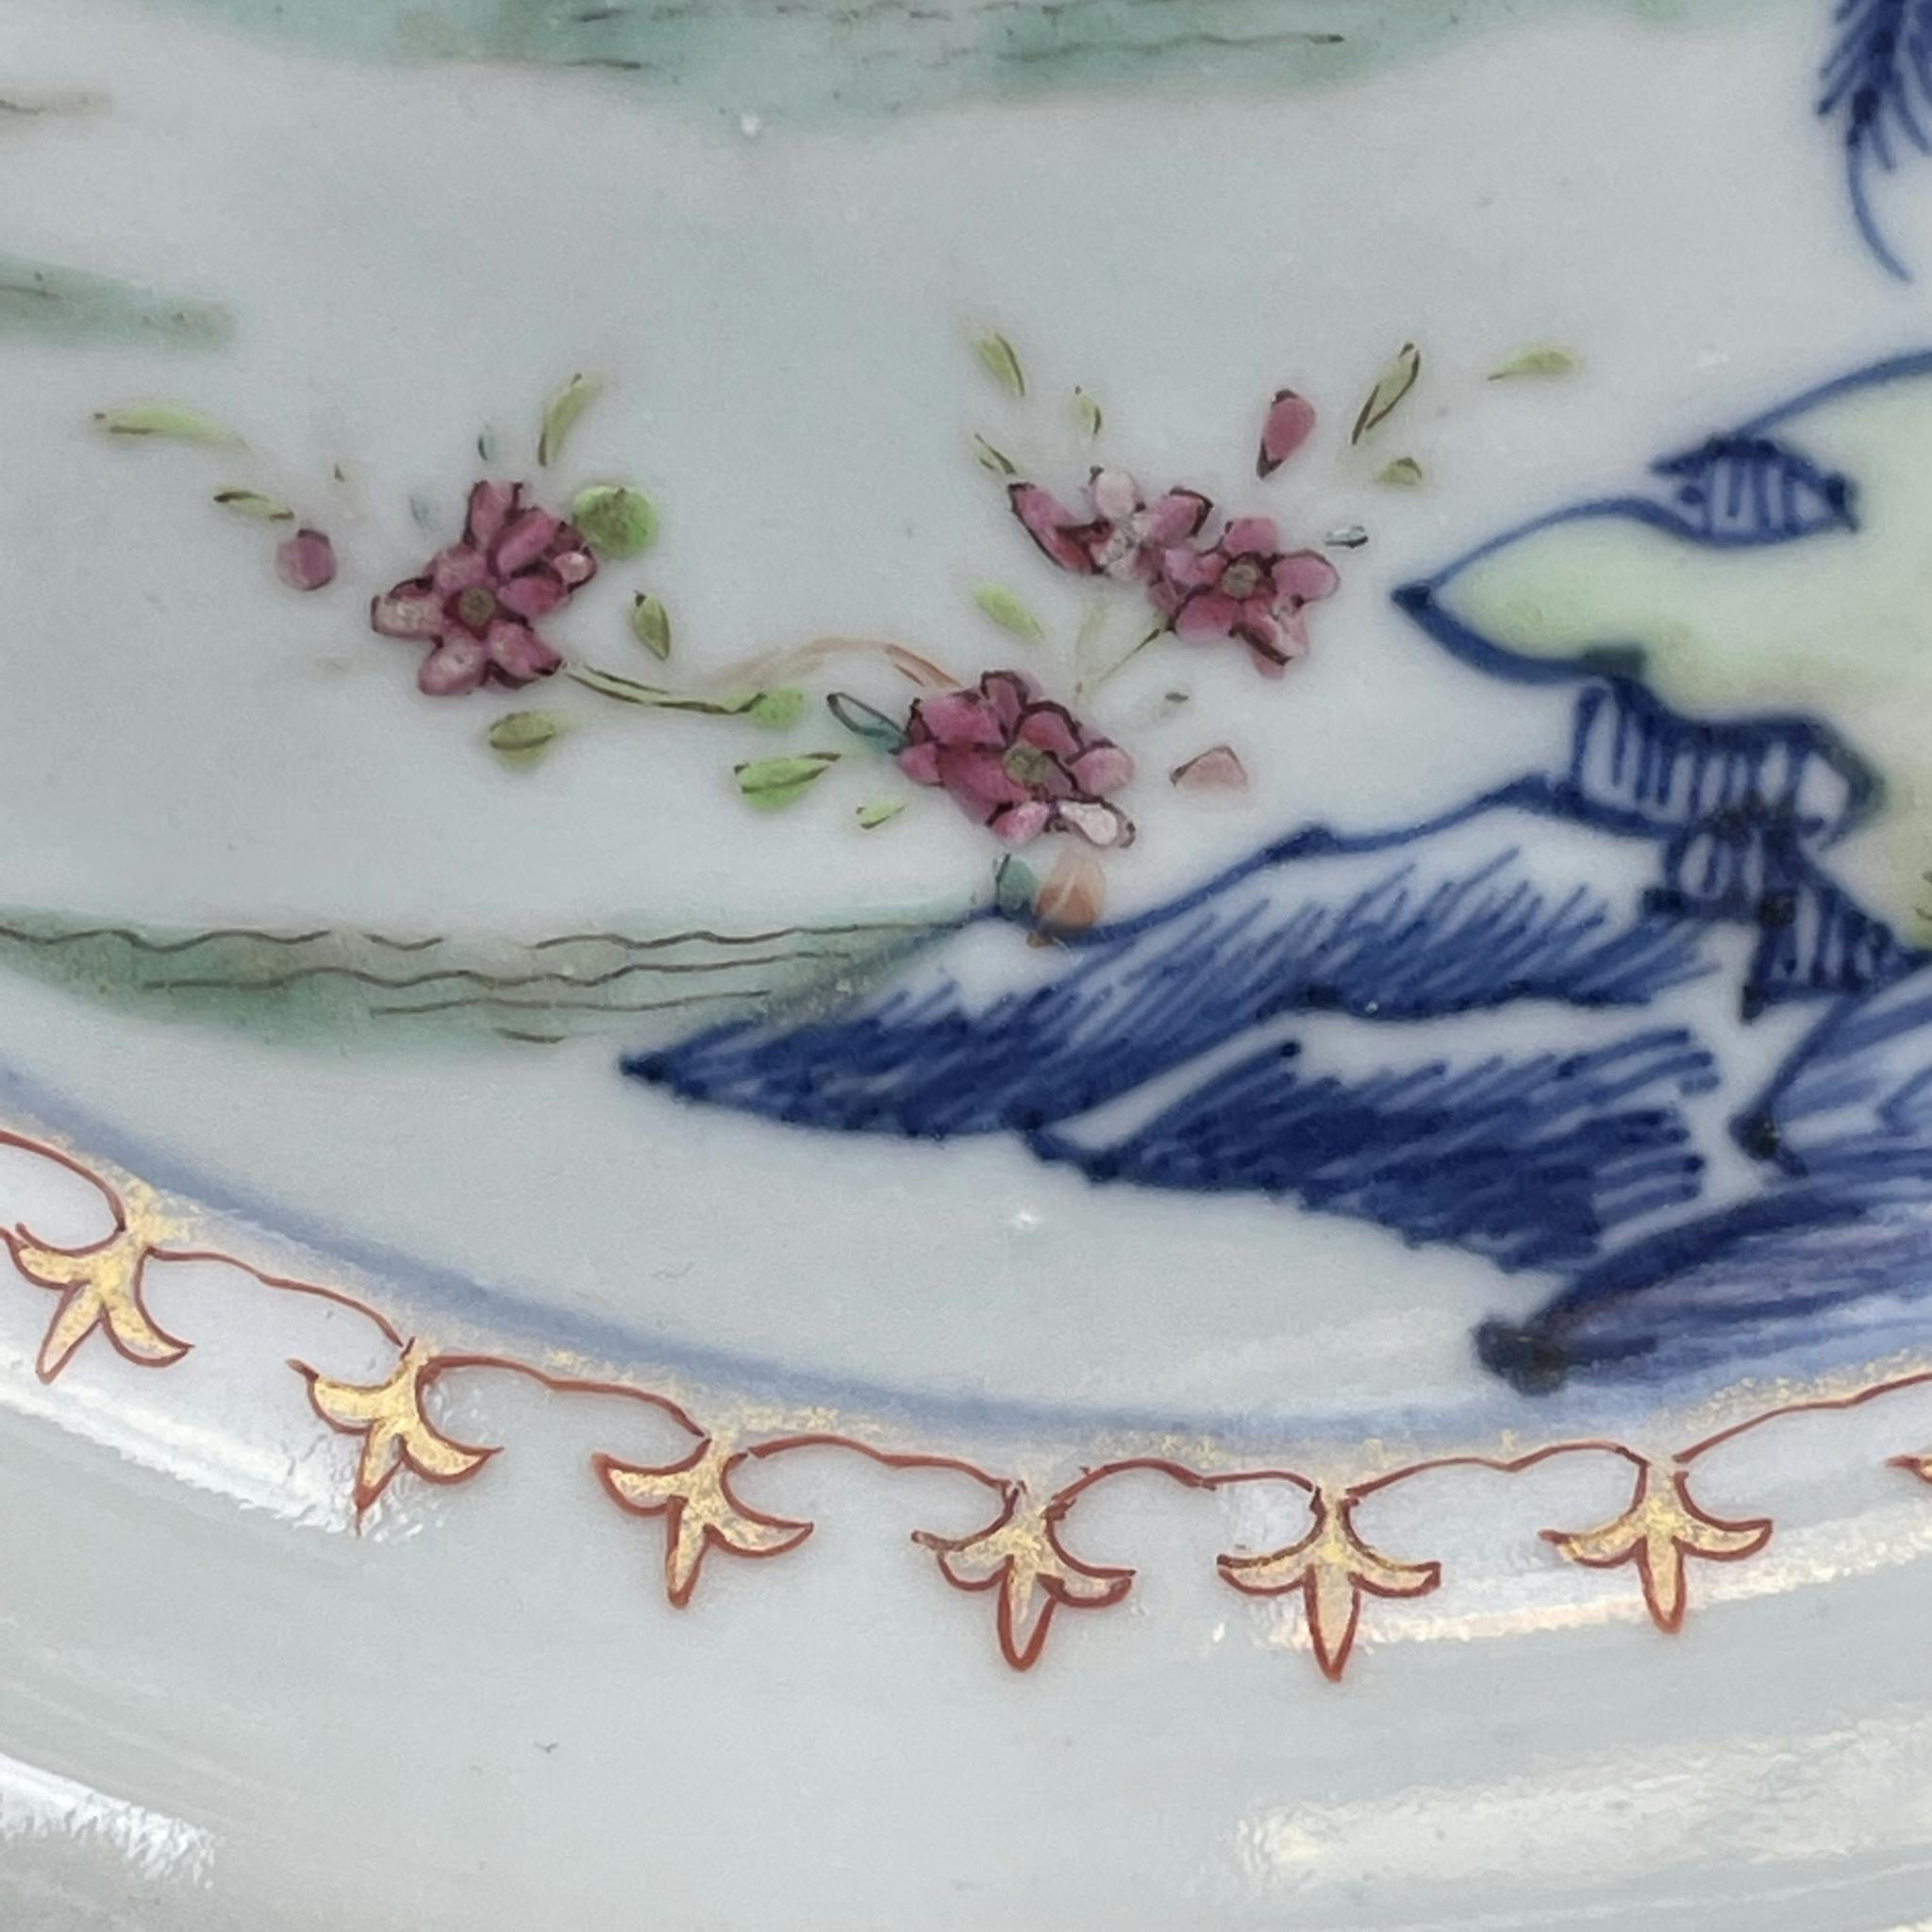 Antique Chinese underglazed blue plate with Famille Rose, Qianlong, Qing #1302